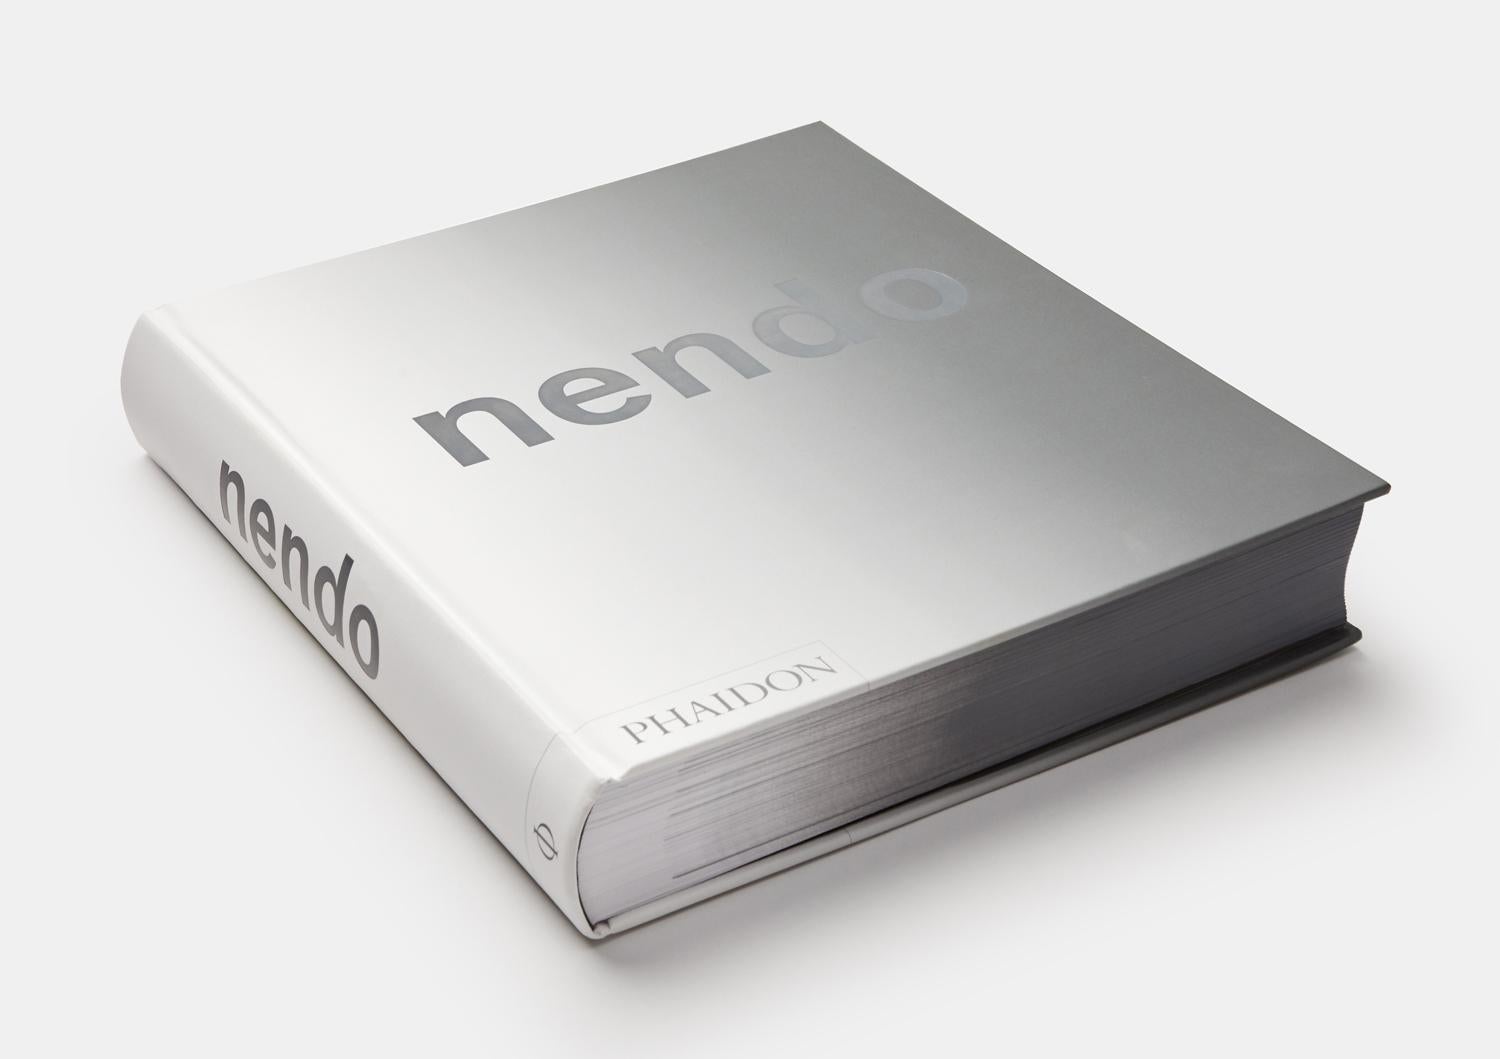 The ultimate monograph on one of the world's most creative, prolific, and legendary multidisciplinary design studios
nendo's extensive, idiosyncratic body of work flows seamlessly across disciplines, and is executed in every medium imaginable - from